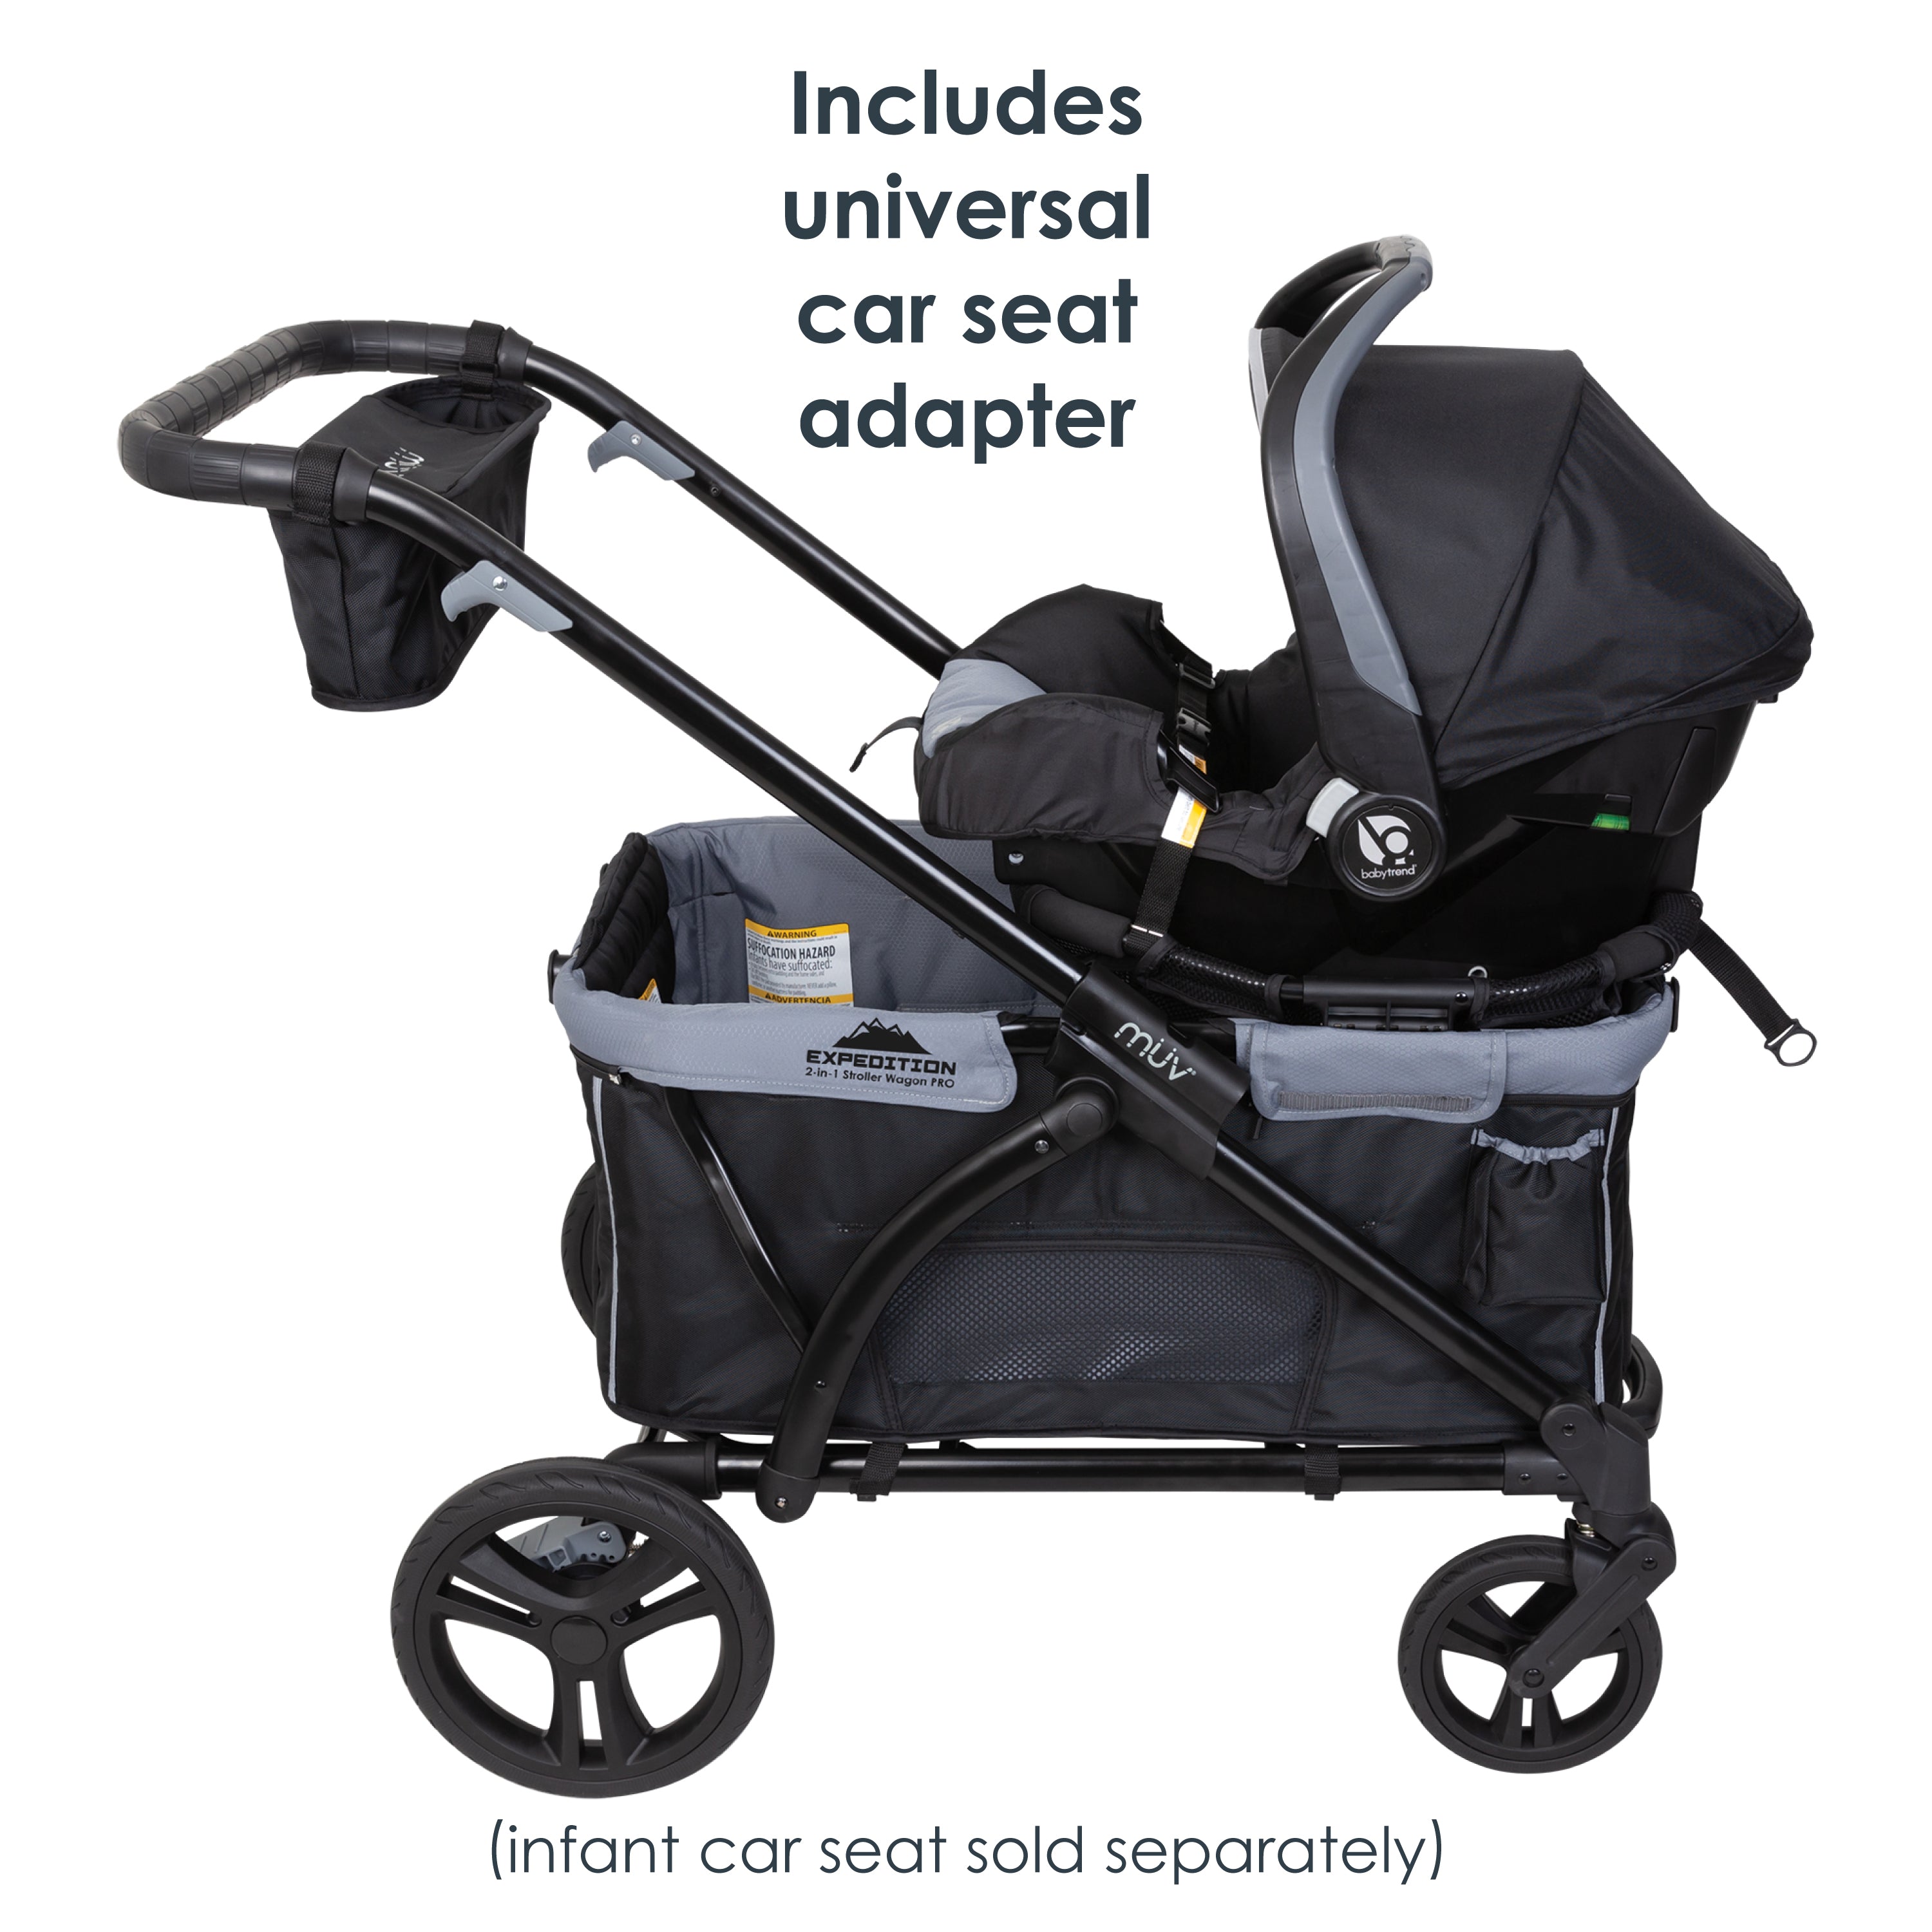 MUV® 2-in-1 Baby Equinox Wagon | Trend Stroller Expedition® PRO